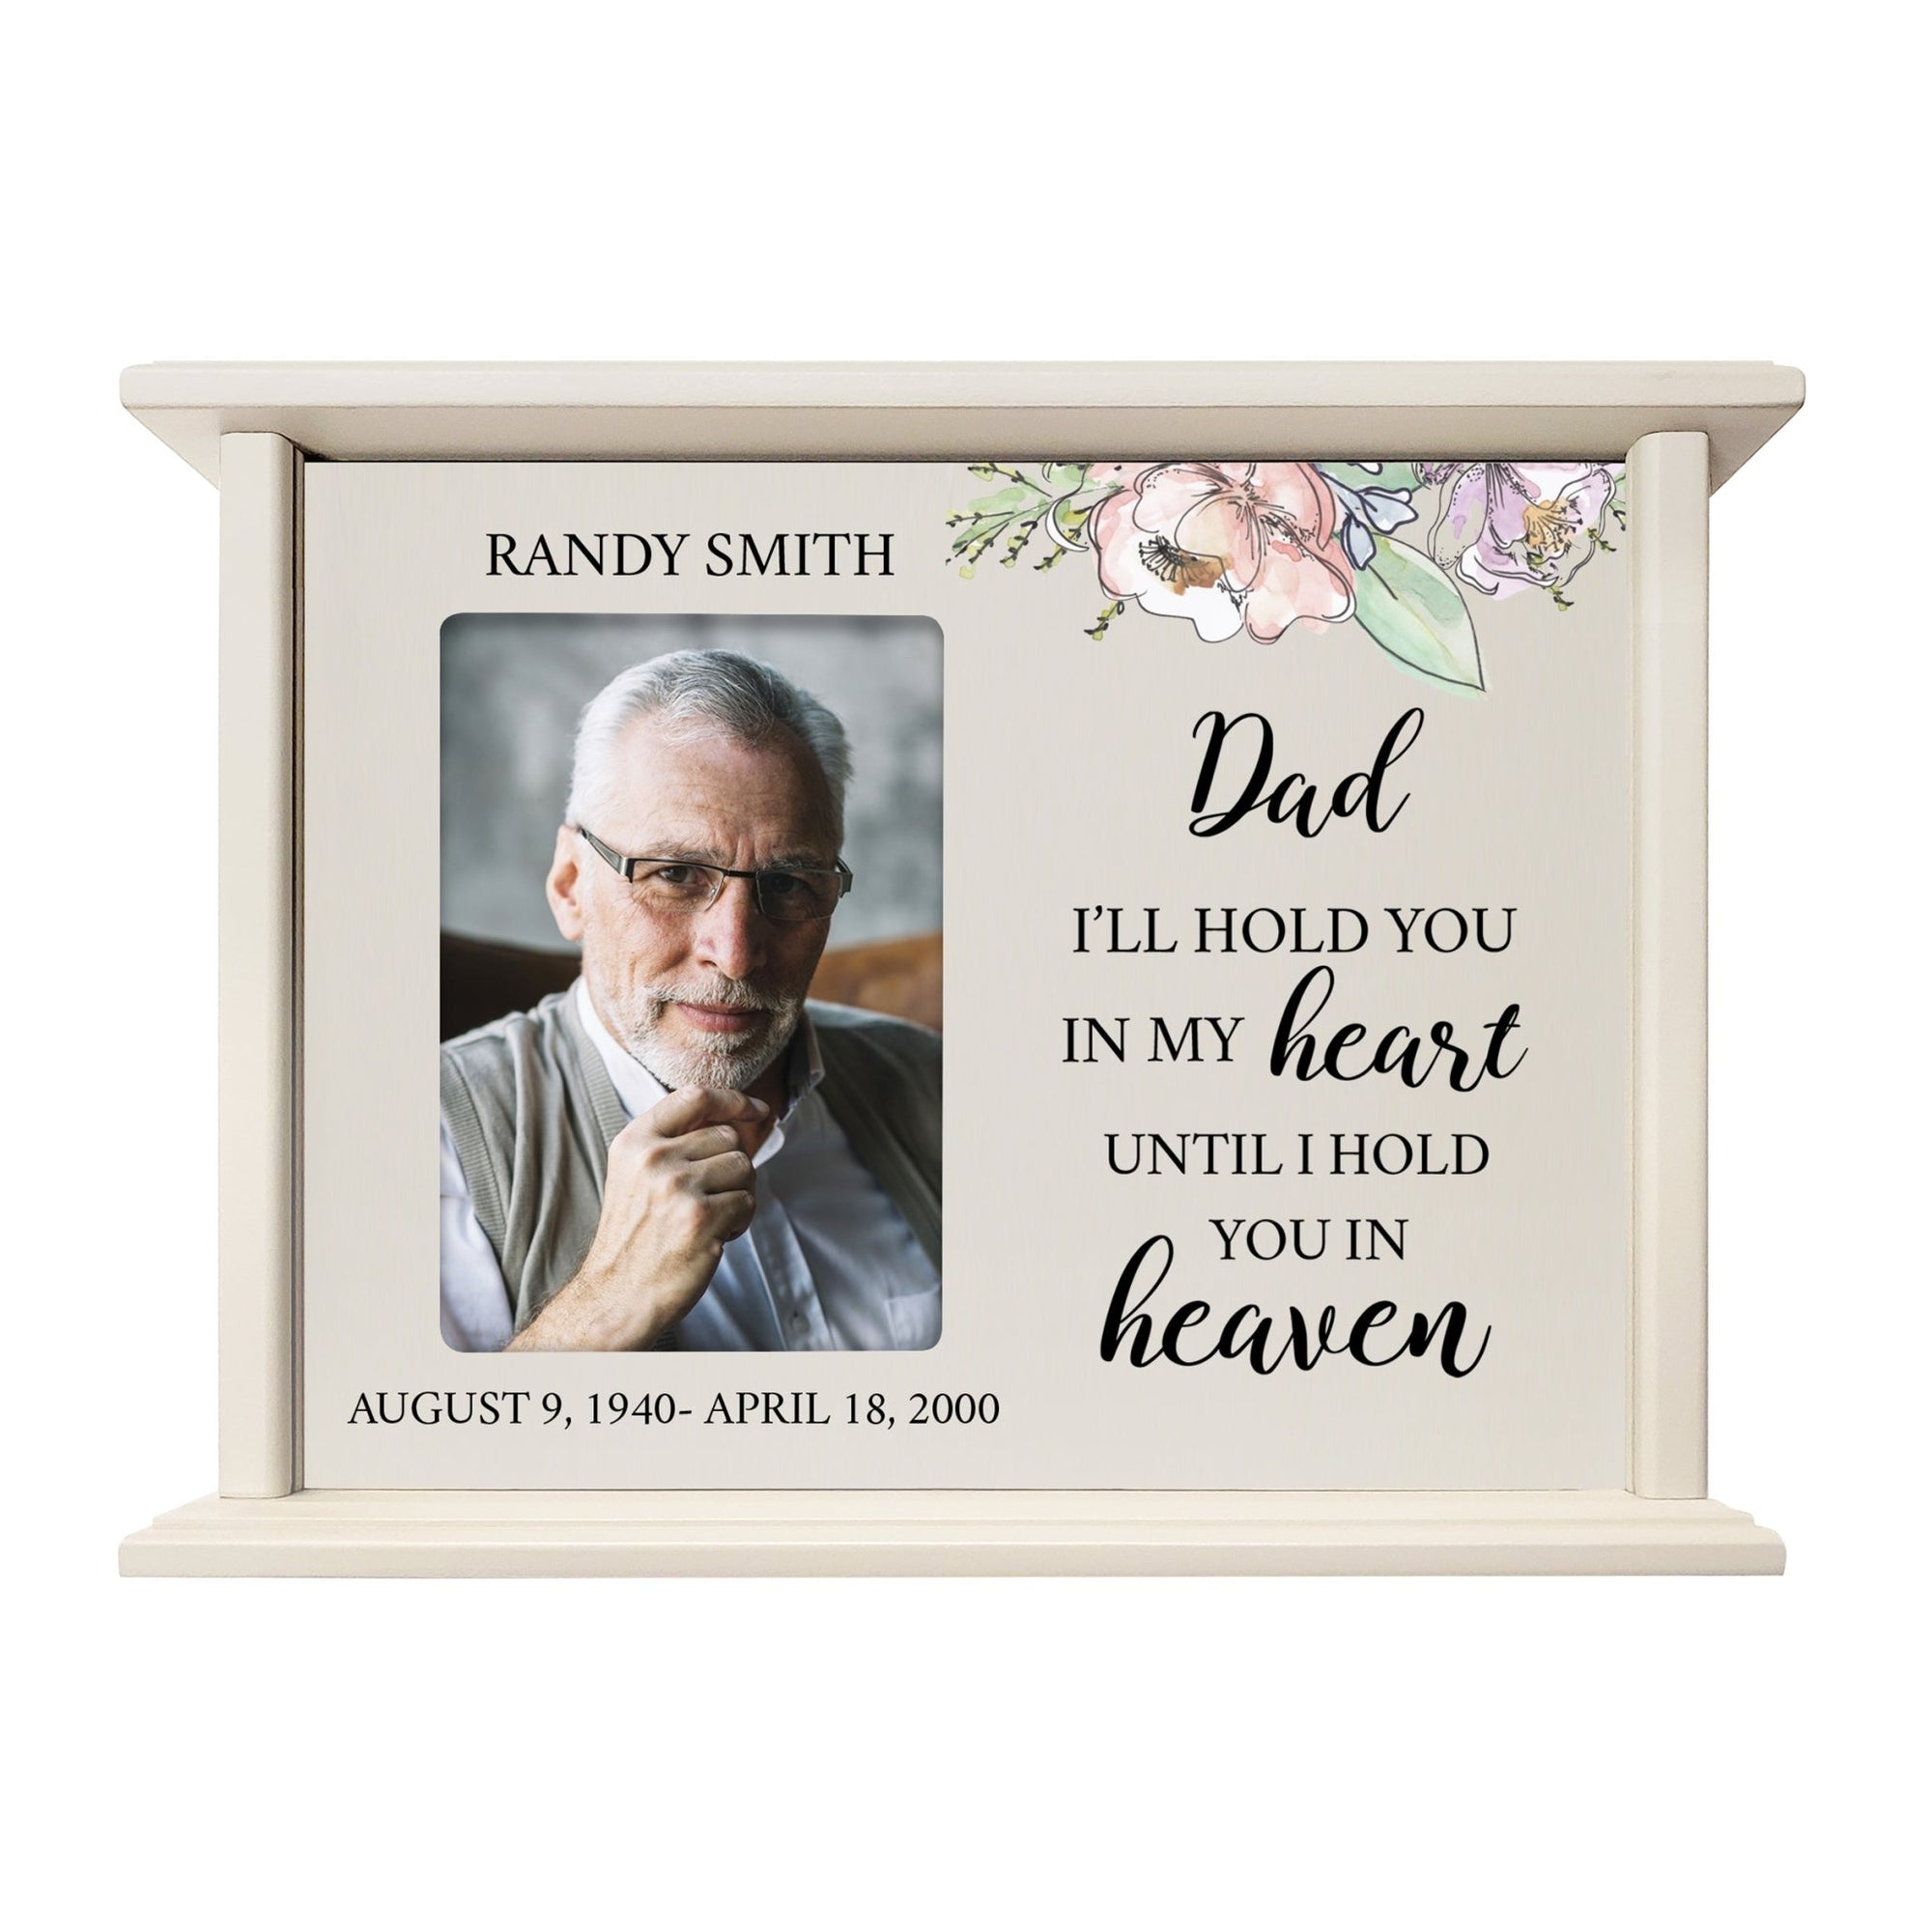 Personalized Memorial Cherry Wood 12 x 4.5 x 9 Cremation Urn Box with Picture Frame holds 200 cu in of Human Ashes and 4x6 Photo - I’ll Hold In My Arms (Ivory) - LifeSong Milestones